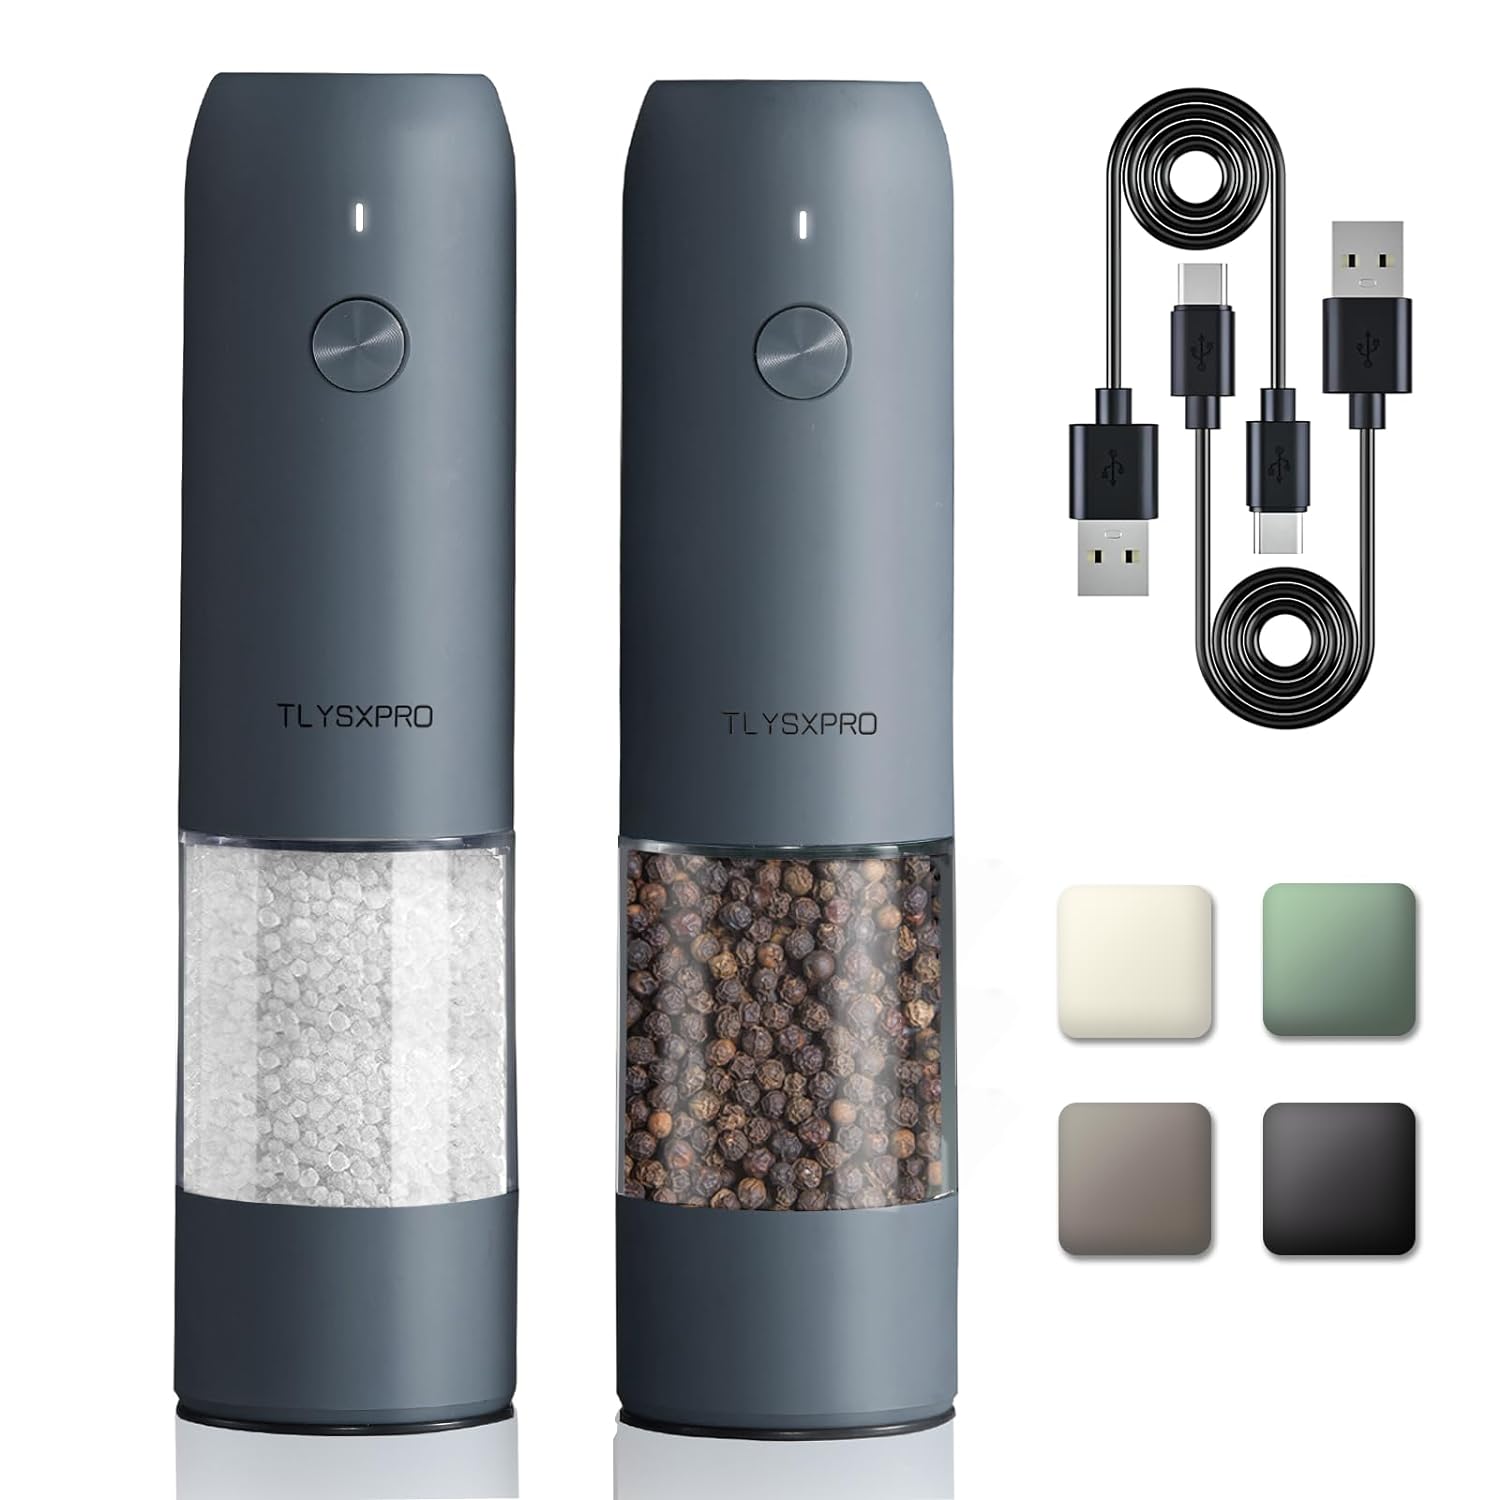 Electric Salt and Pepper Grinder Set with USB Rechargeable, Automatic One Hand Operation with Adjustable Coarseness, Pepper Mill Grinder Refillable with LED Light, Kitchen Gadgets (2 Packs, Blue-Grey)